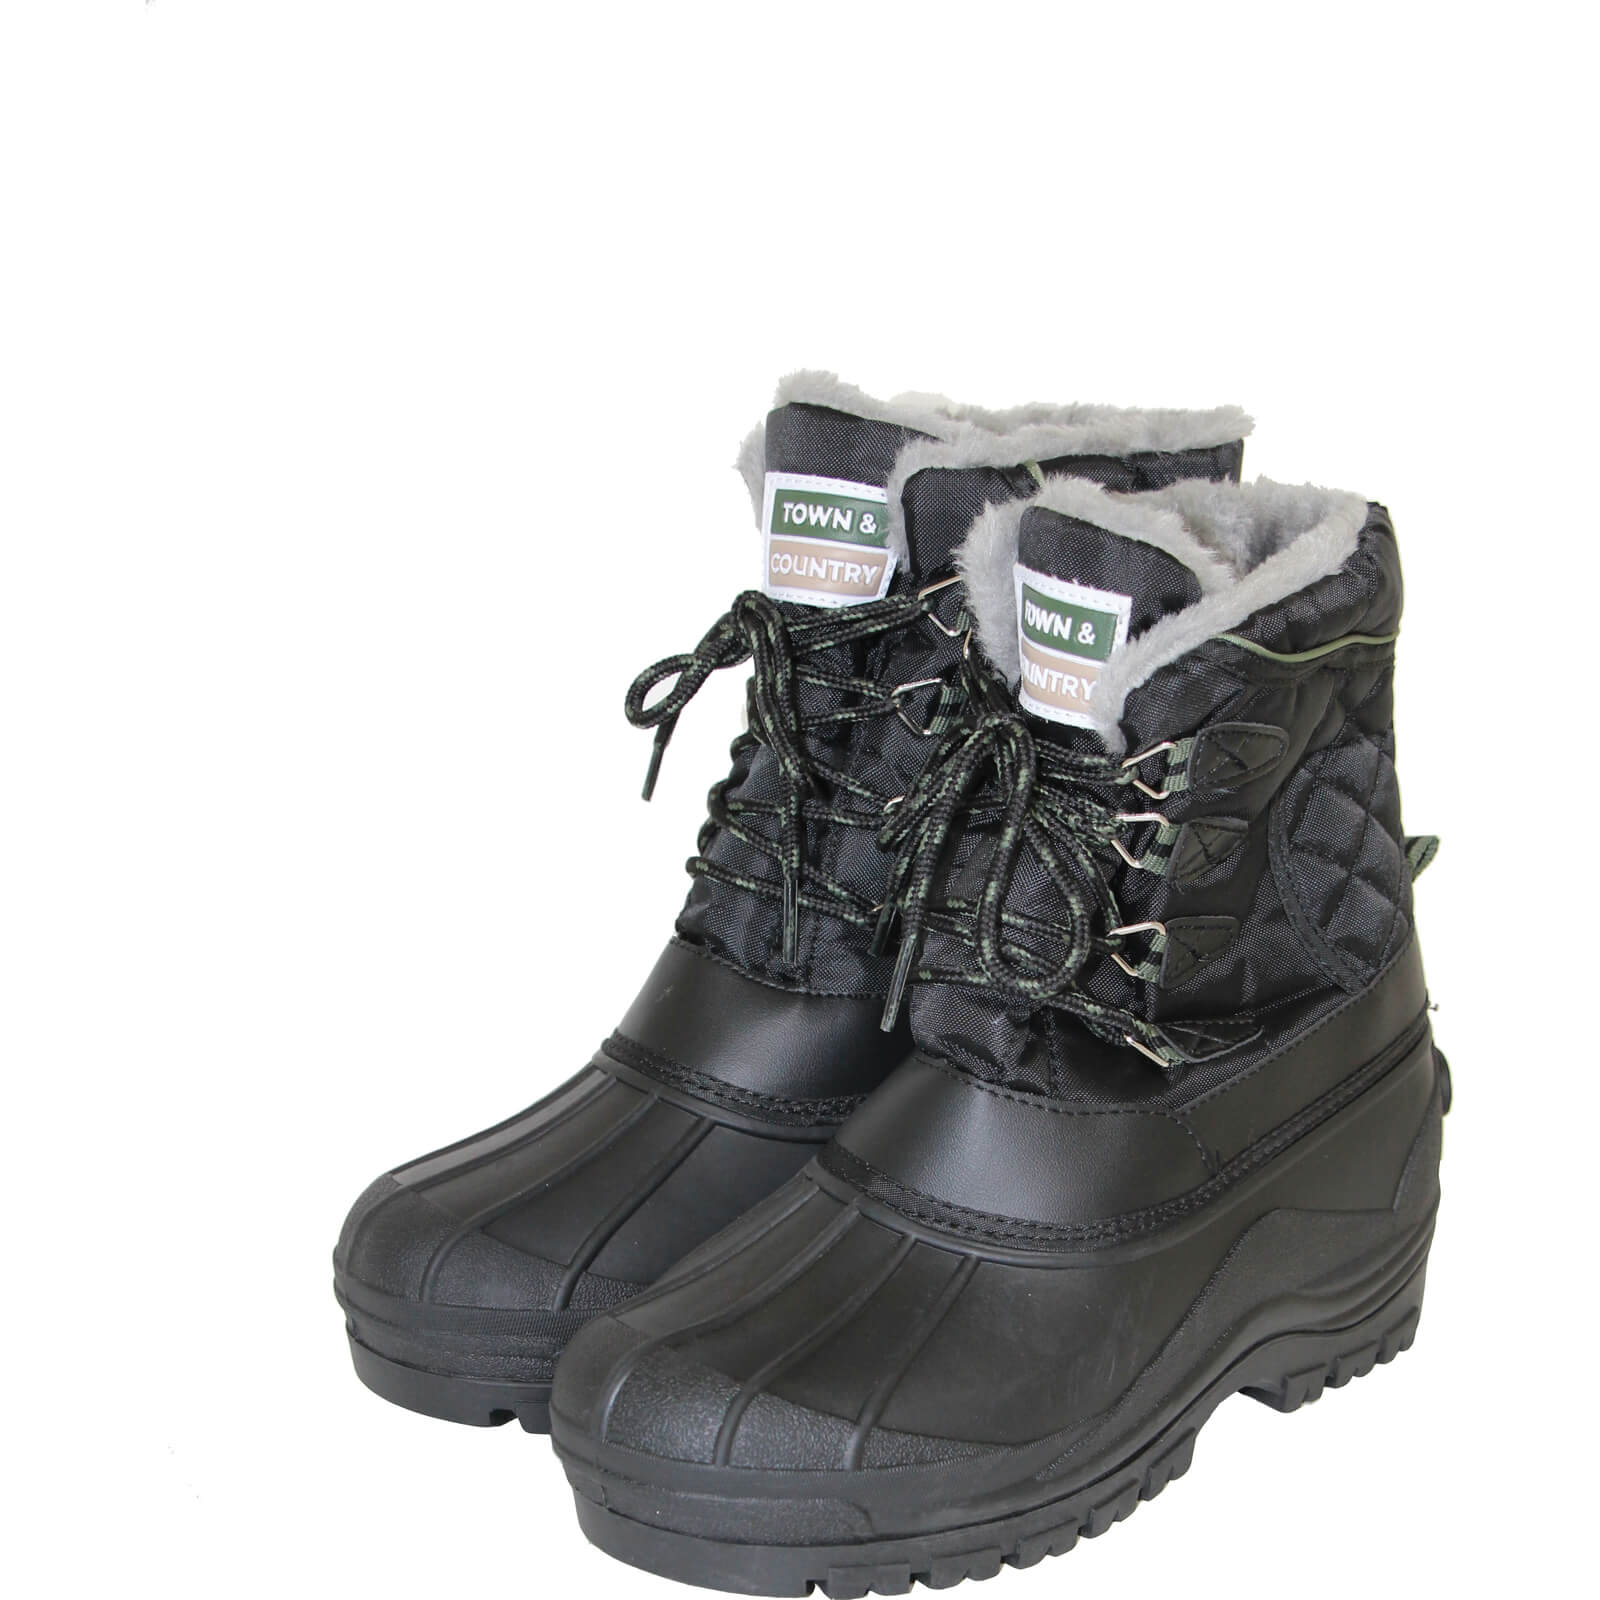 Image of Town and Country Curbridge Waterproof Lined Winter Boots Black Size 6